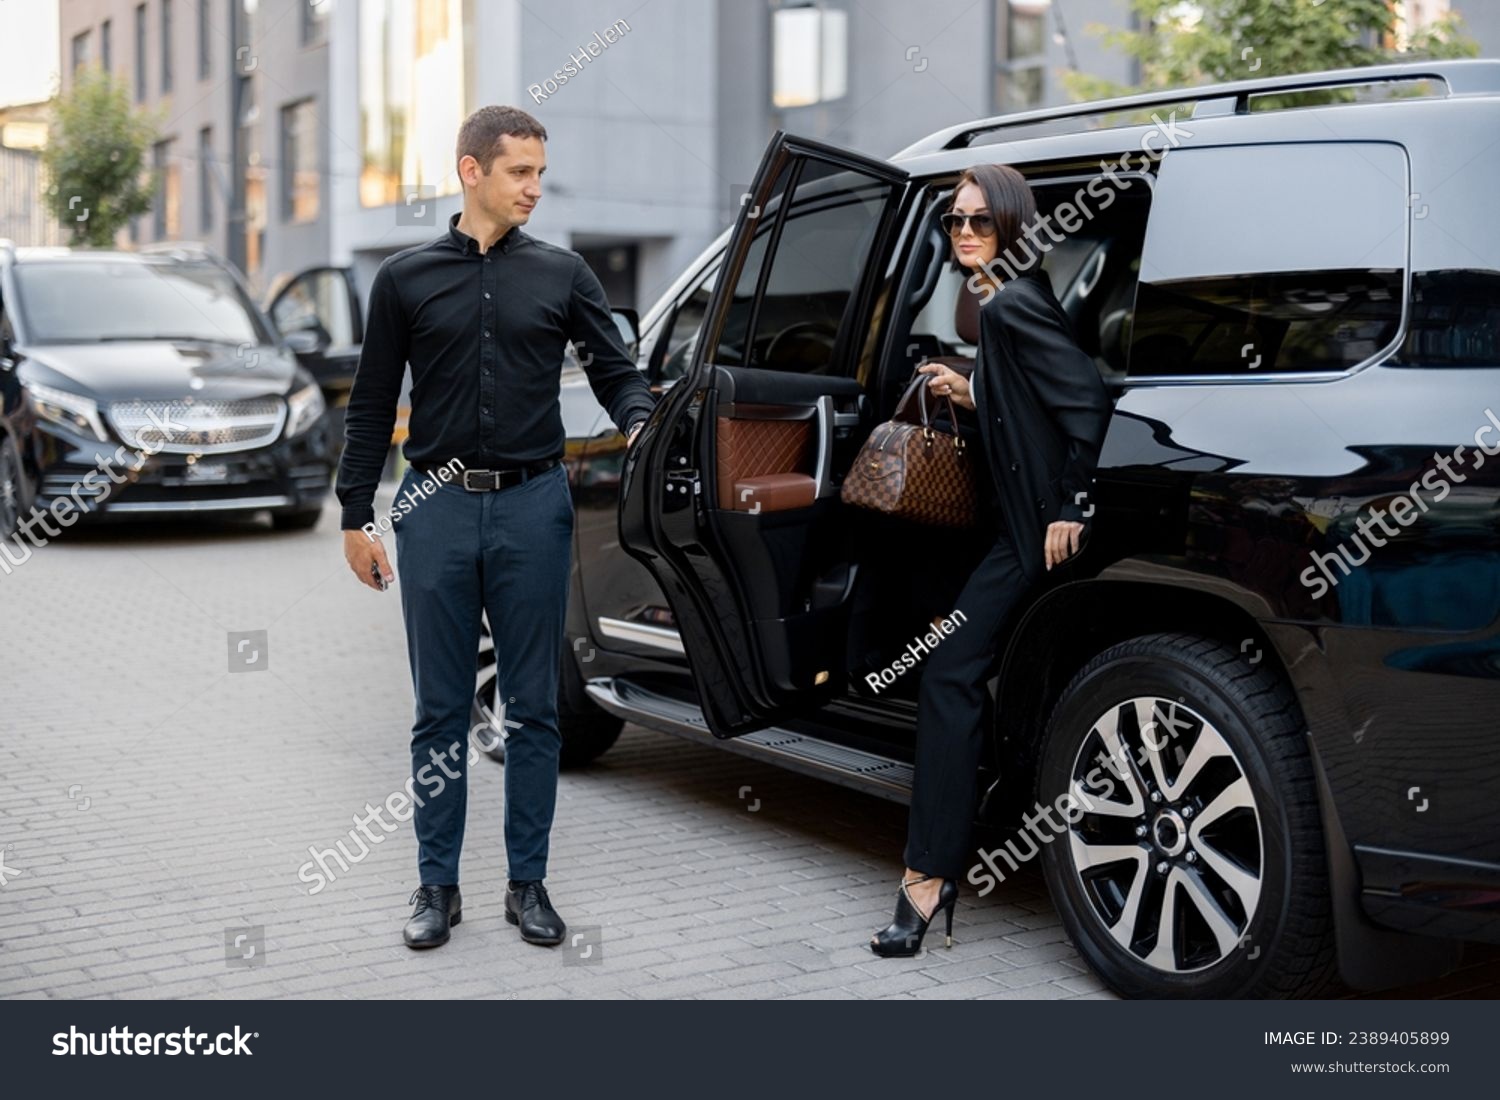 Male driver helps a business lady to get out of a car, opening door of a luxury SUV taxi. Business lady with handbag wearing black formal wear. Concept of transportation service #2389405899